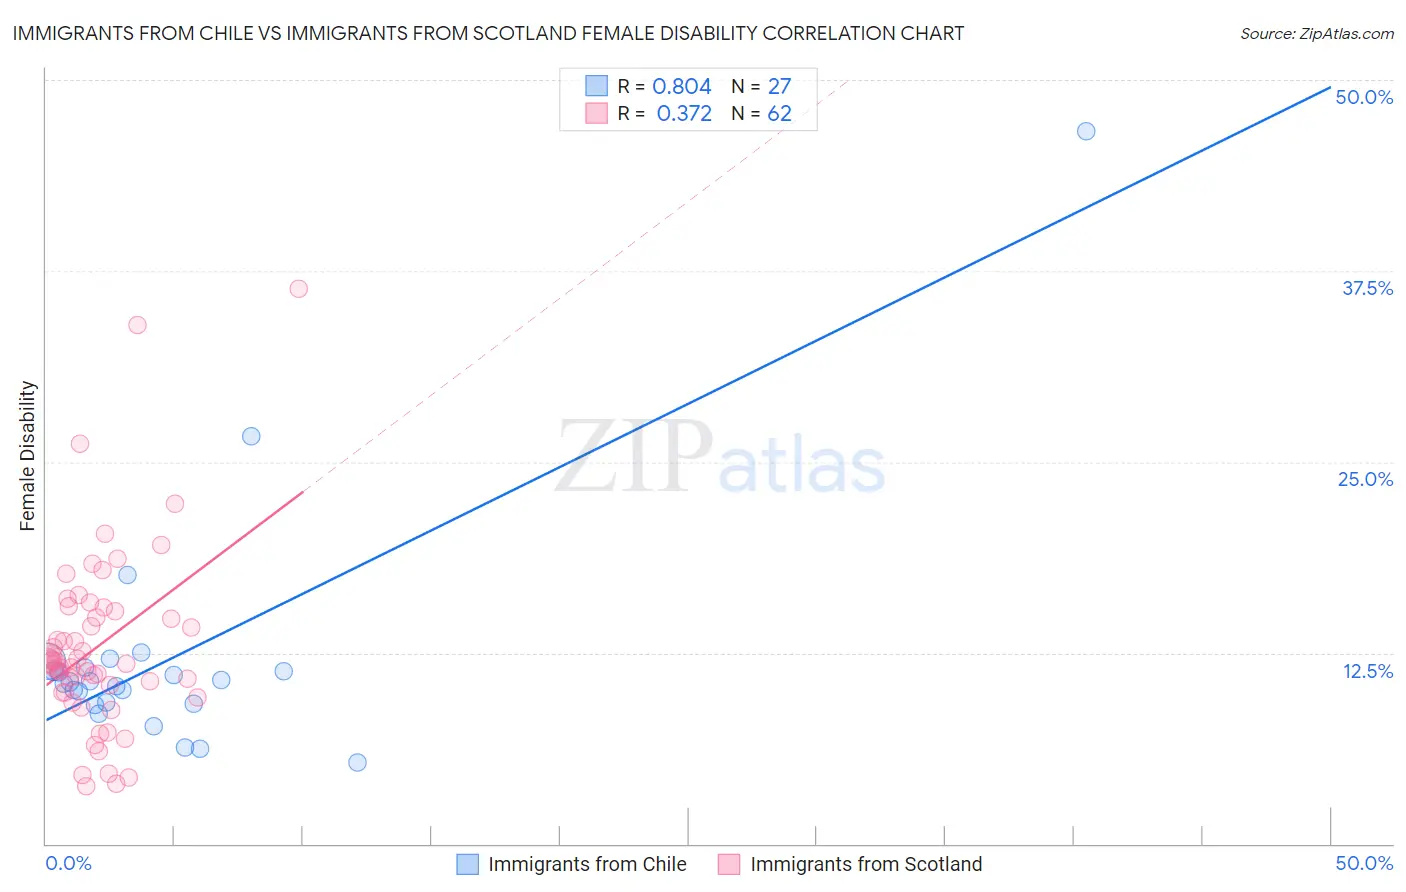 Immigrants from Chile vs Immigrants from Scotland Female Disability